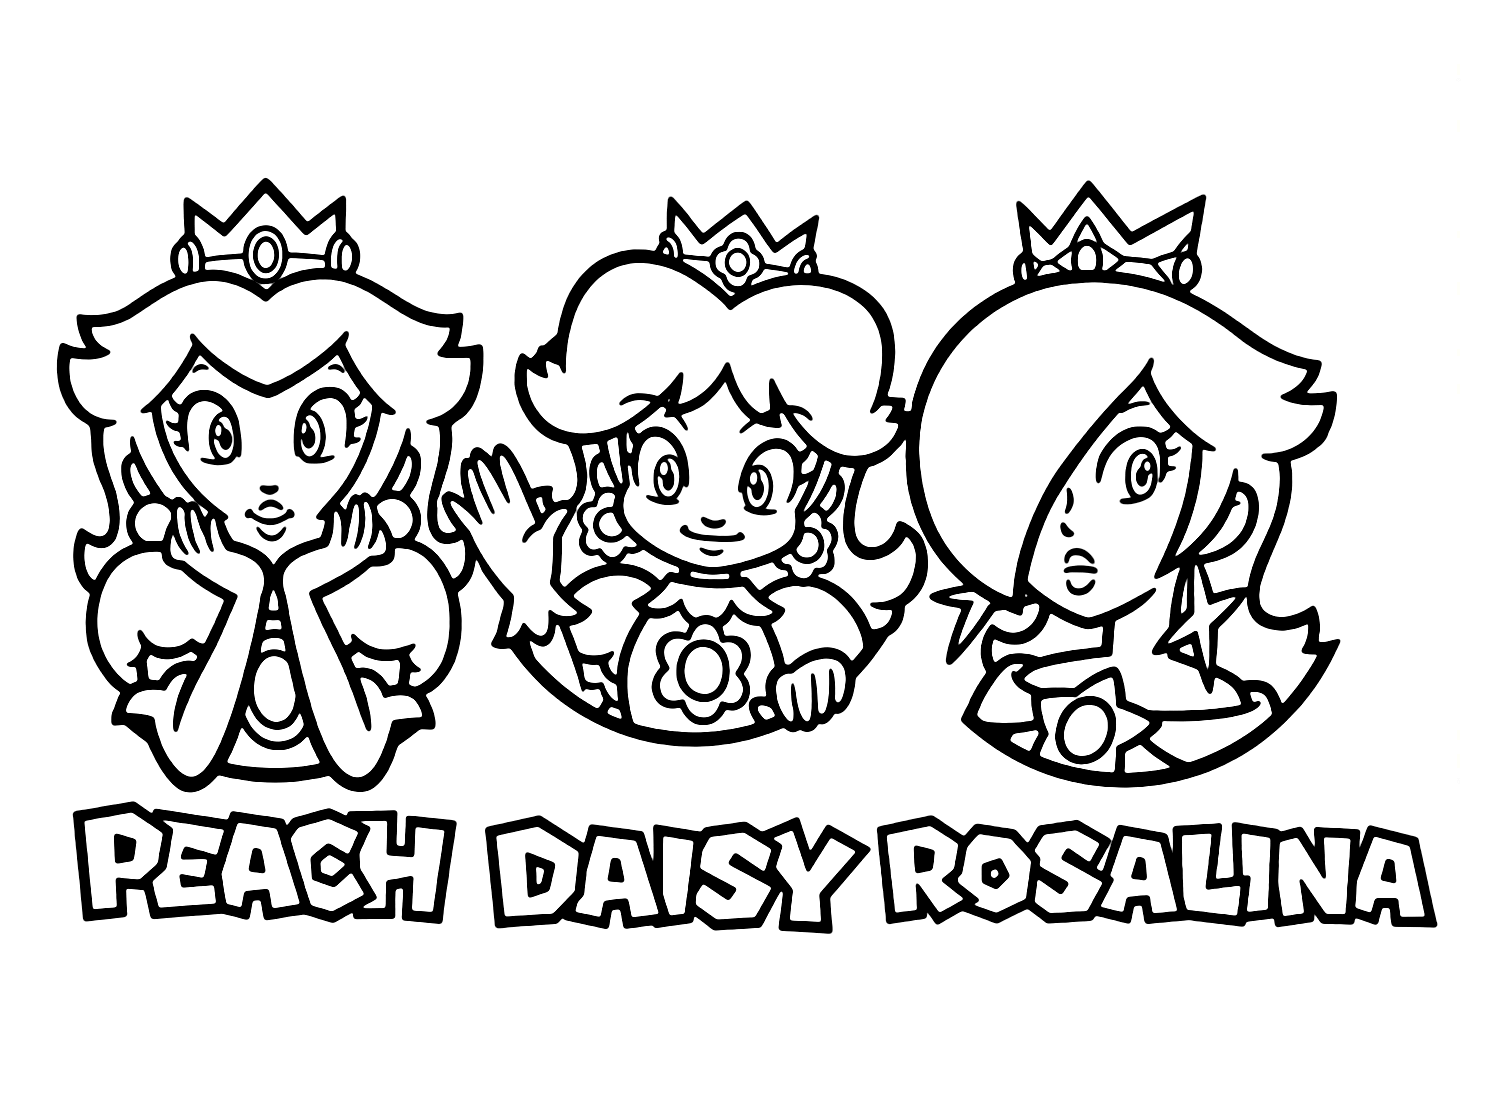 Princess daisy coloring pages printable for free download